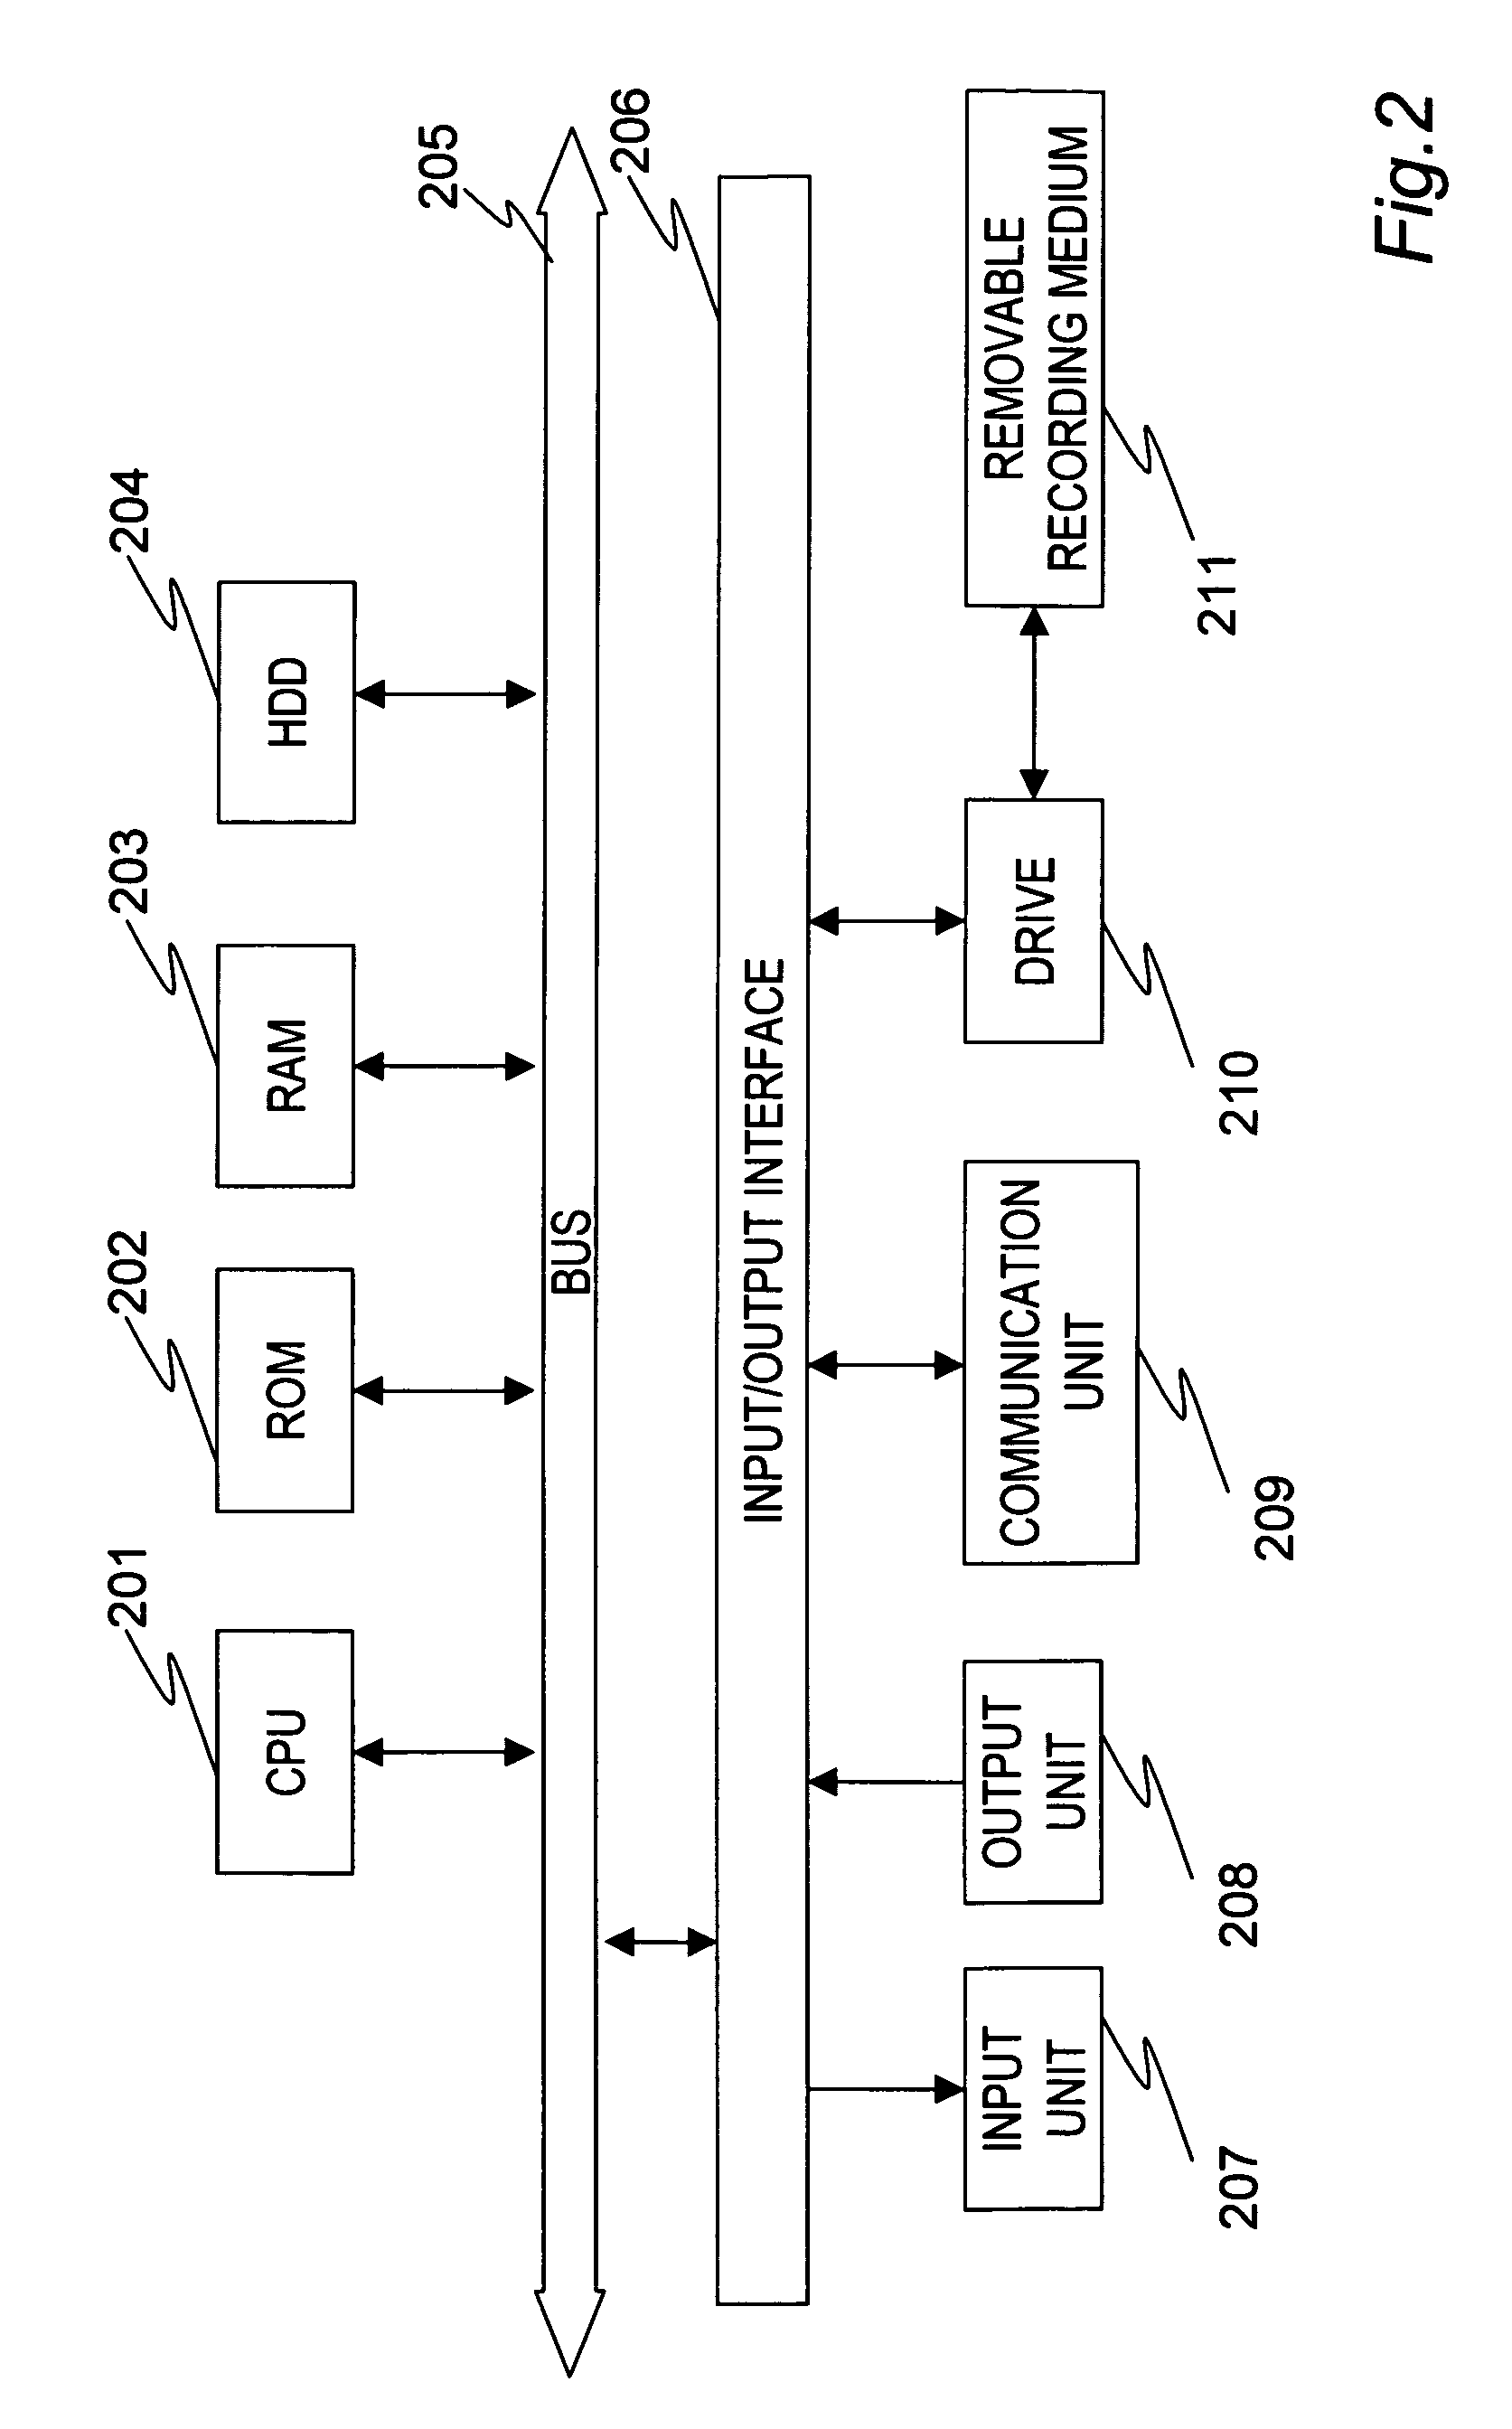 Information processing device, an information processing method, and a computer program to securely connect clients on an external network to devices within an internal network